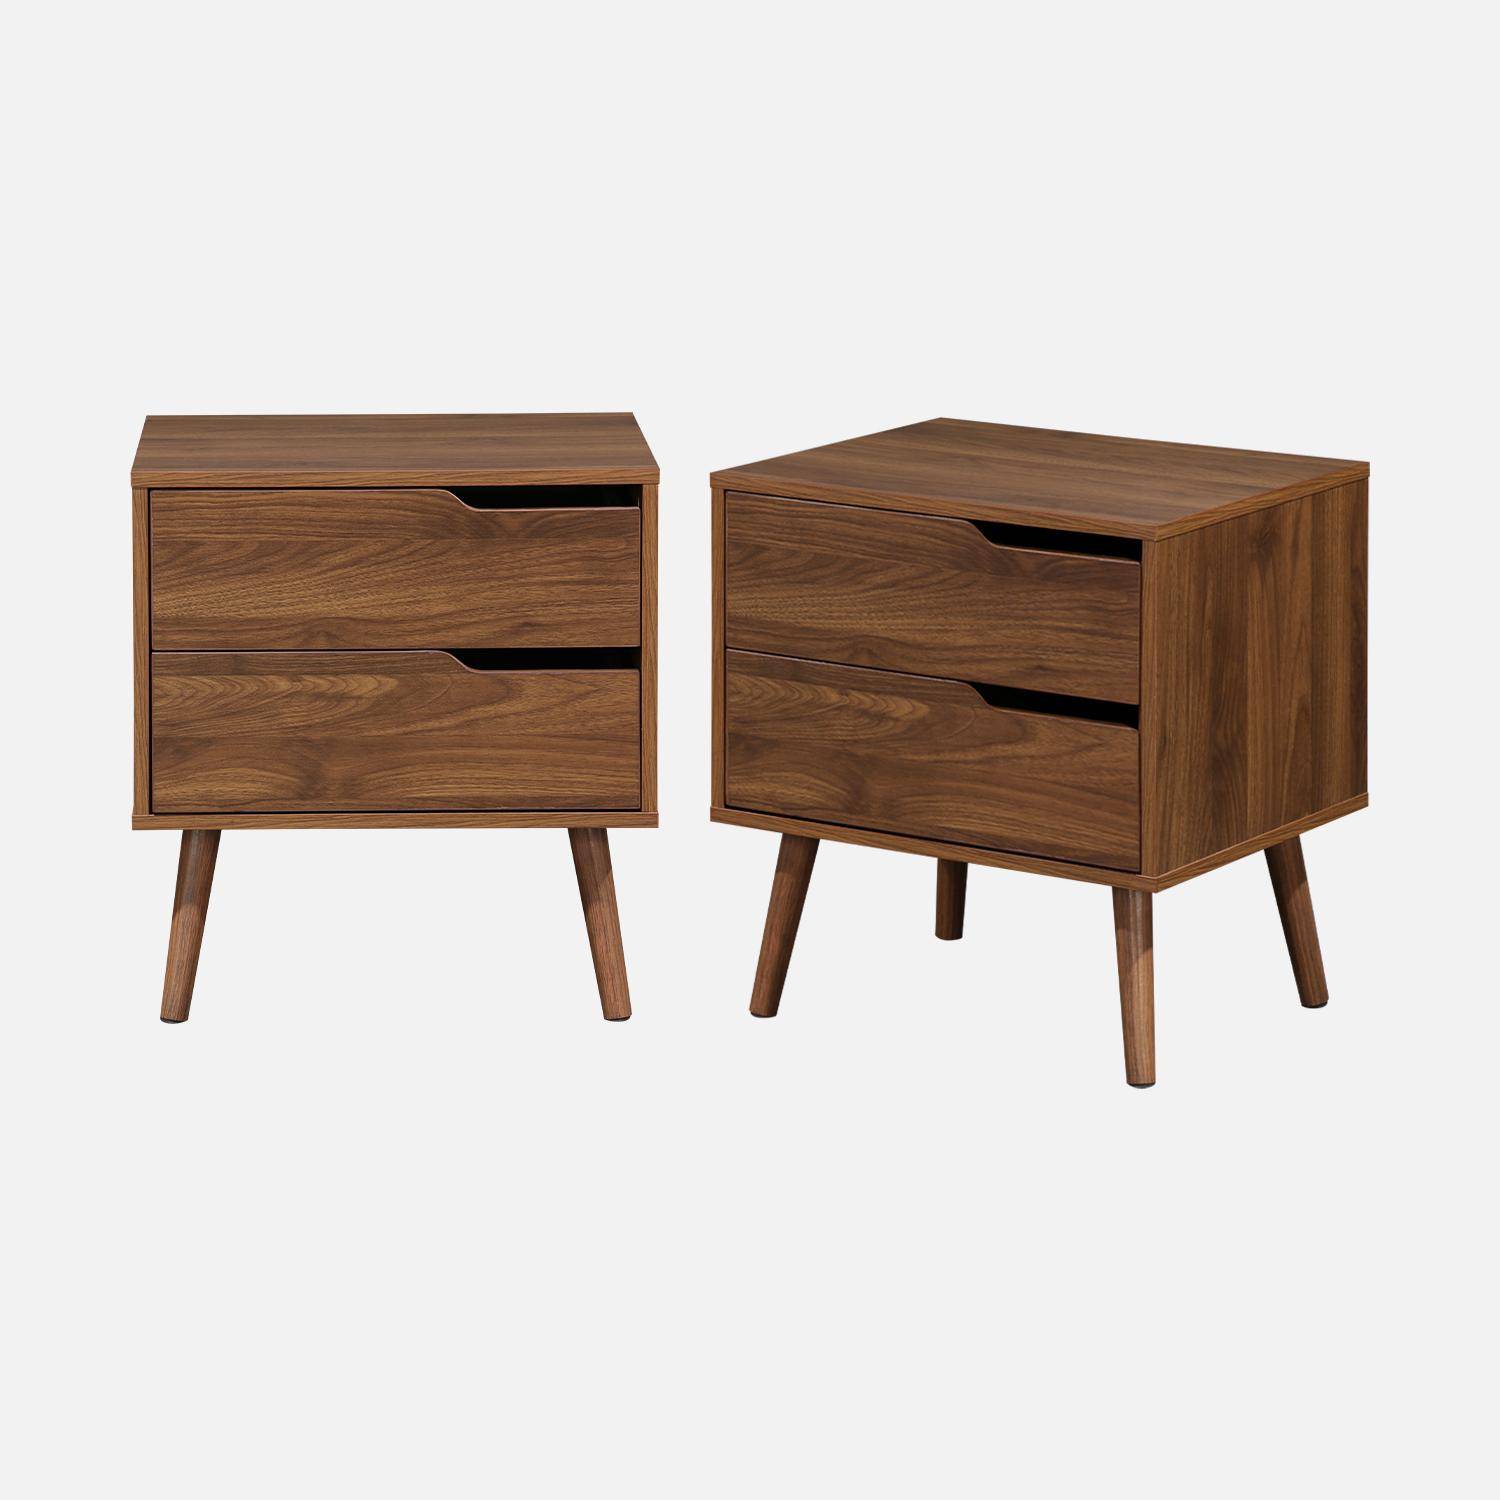 Pair of walnut wood-effect bedside tables, 50x40x55cm, Nepal, 2 drawers Photo4